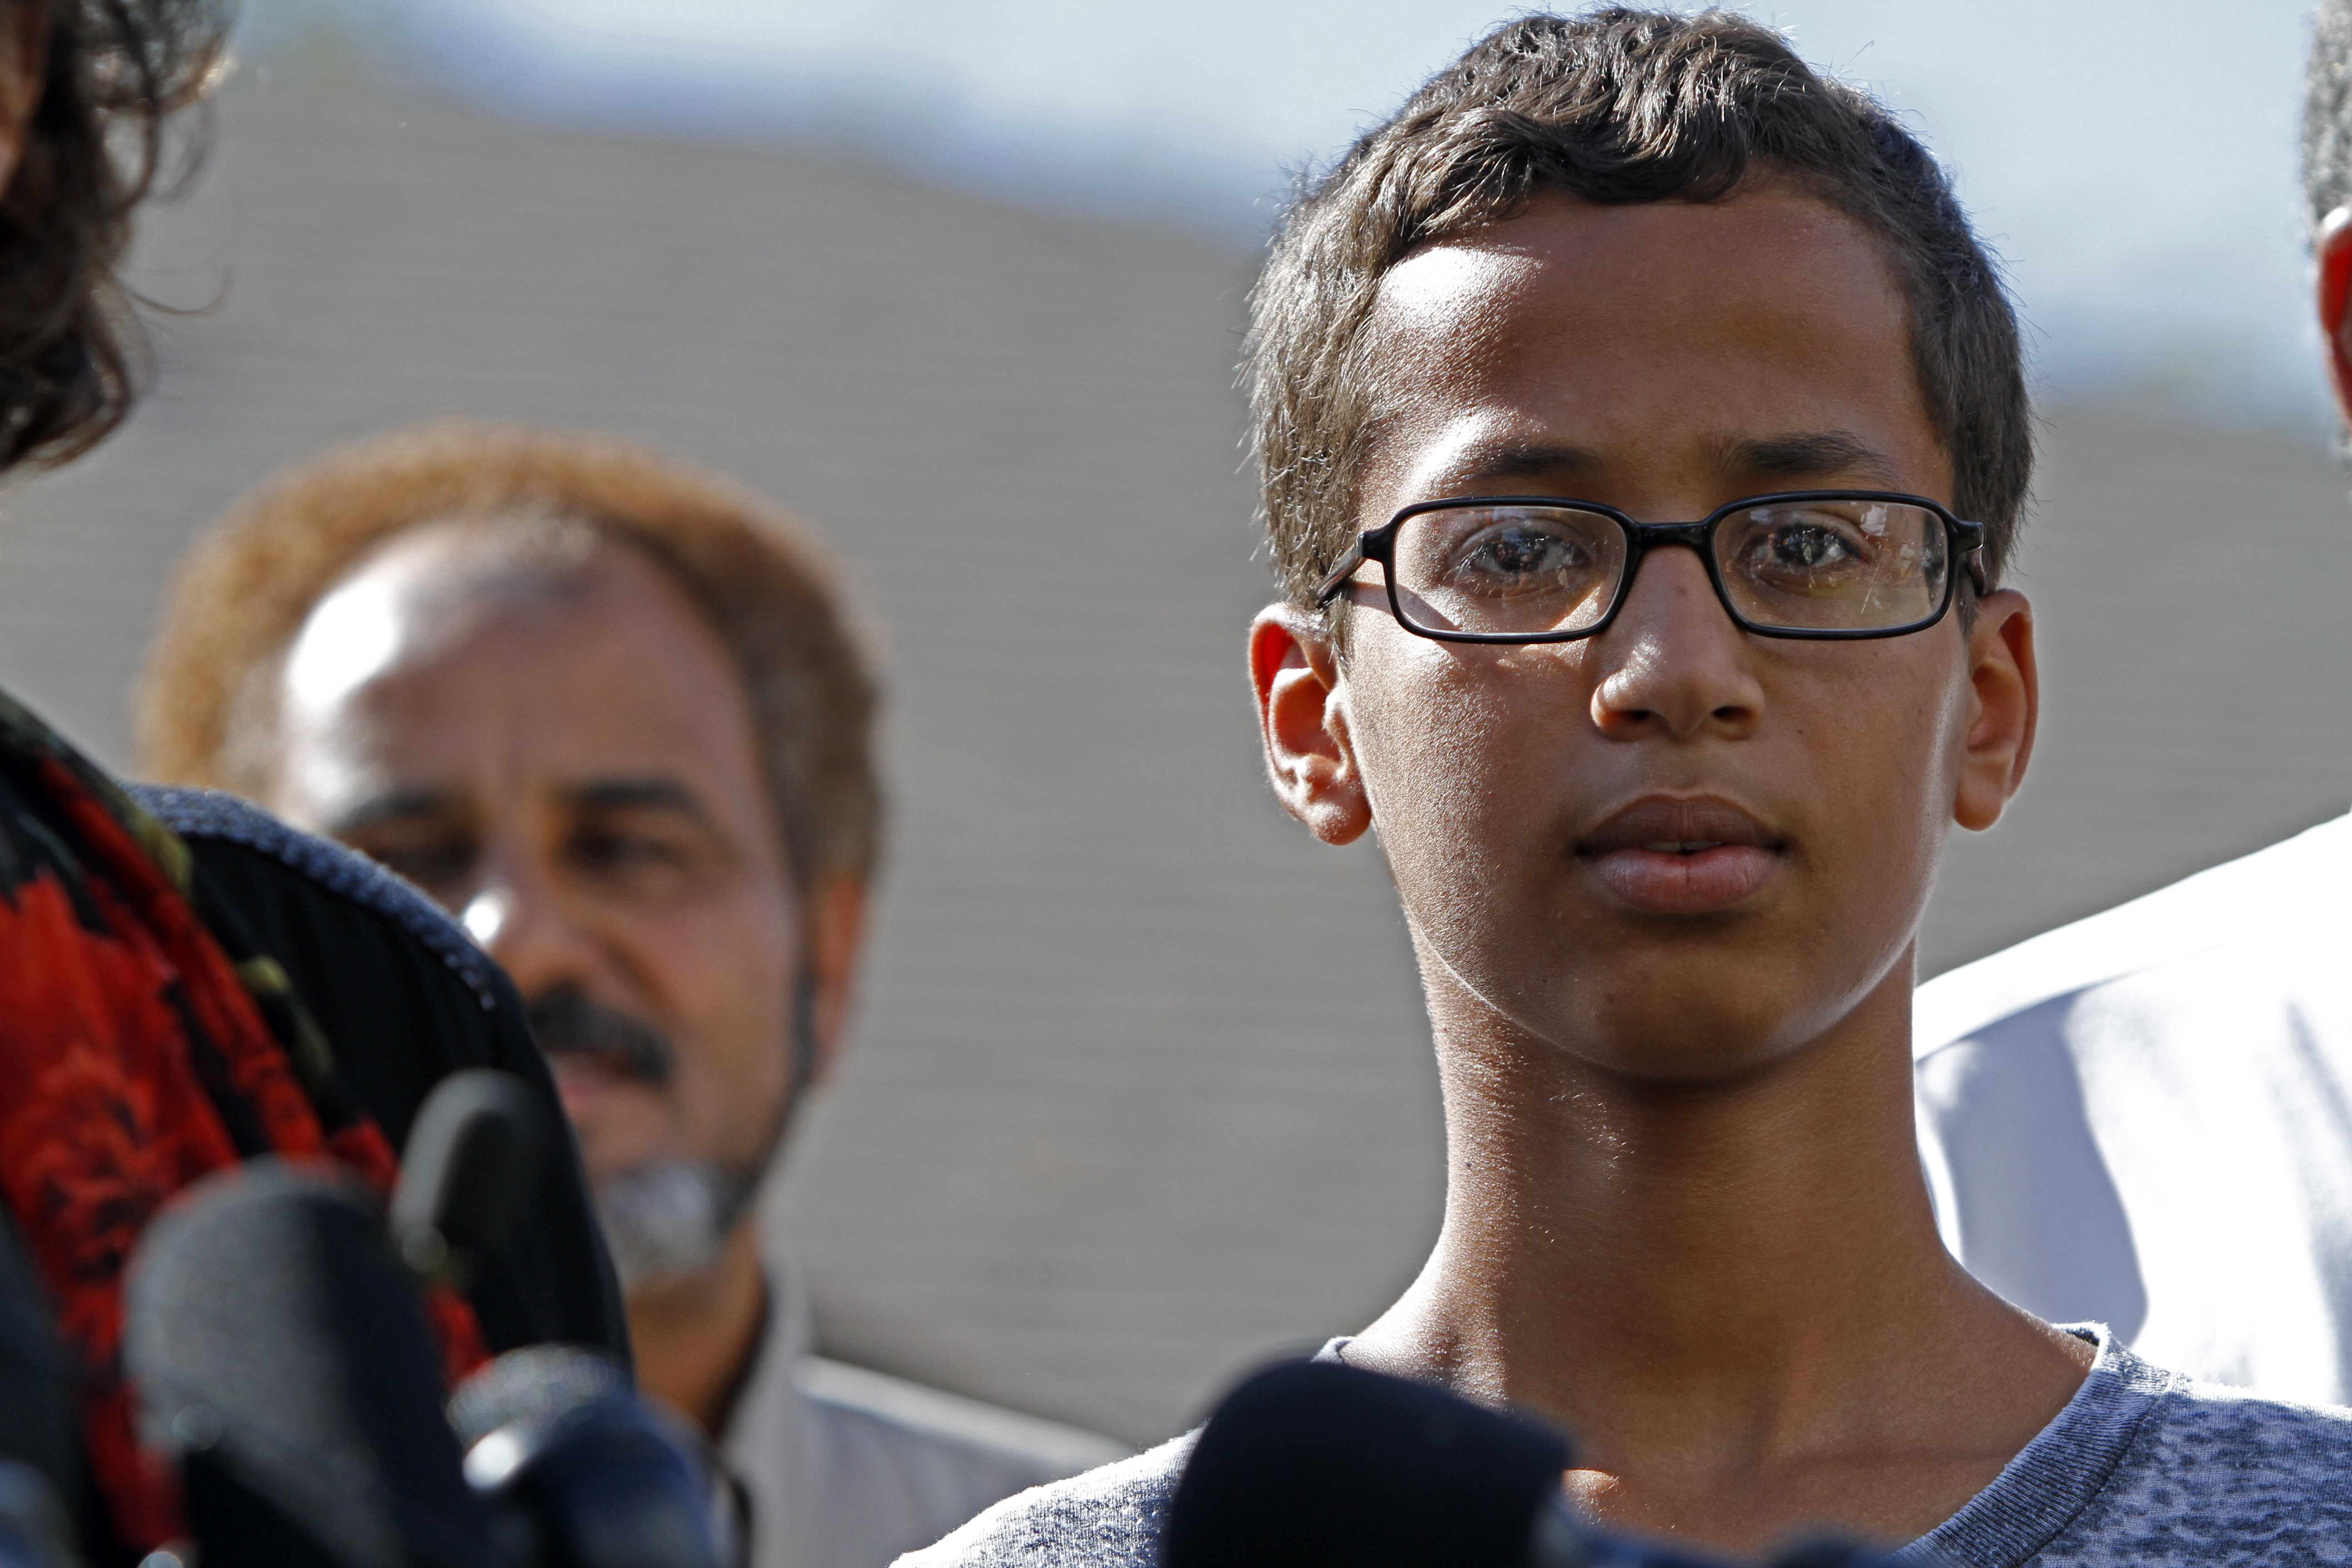 Ahmed Mohamed has a gained celebrity support after being arrested for bringing a homemade clock to a Texas high school. (Photo by Ben Torres/Getty Images)